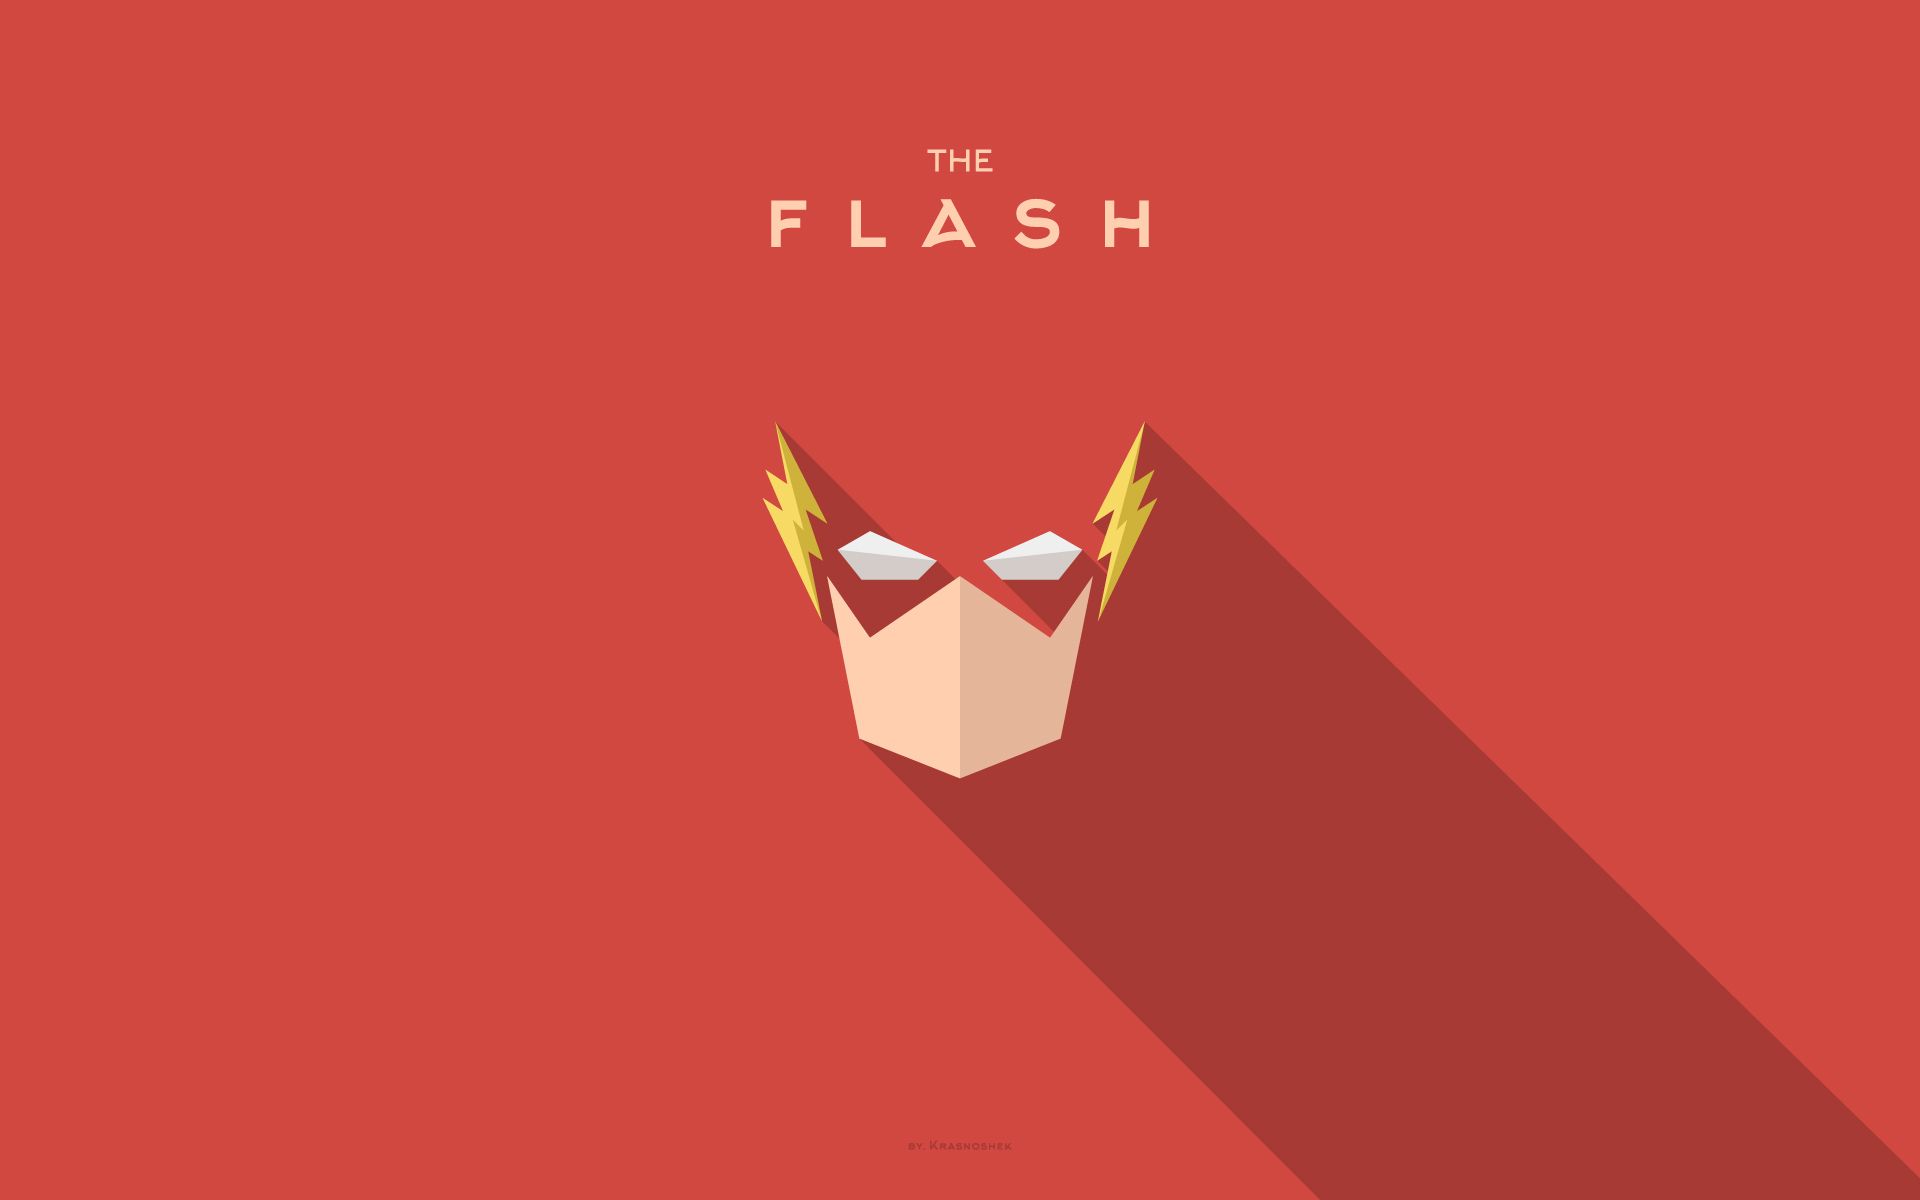 Awesome Flash wallpaper. Link to more sizes in comments. FlashTV